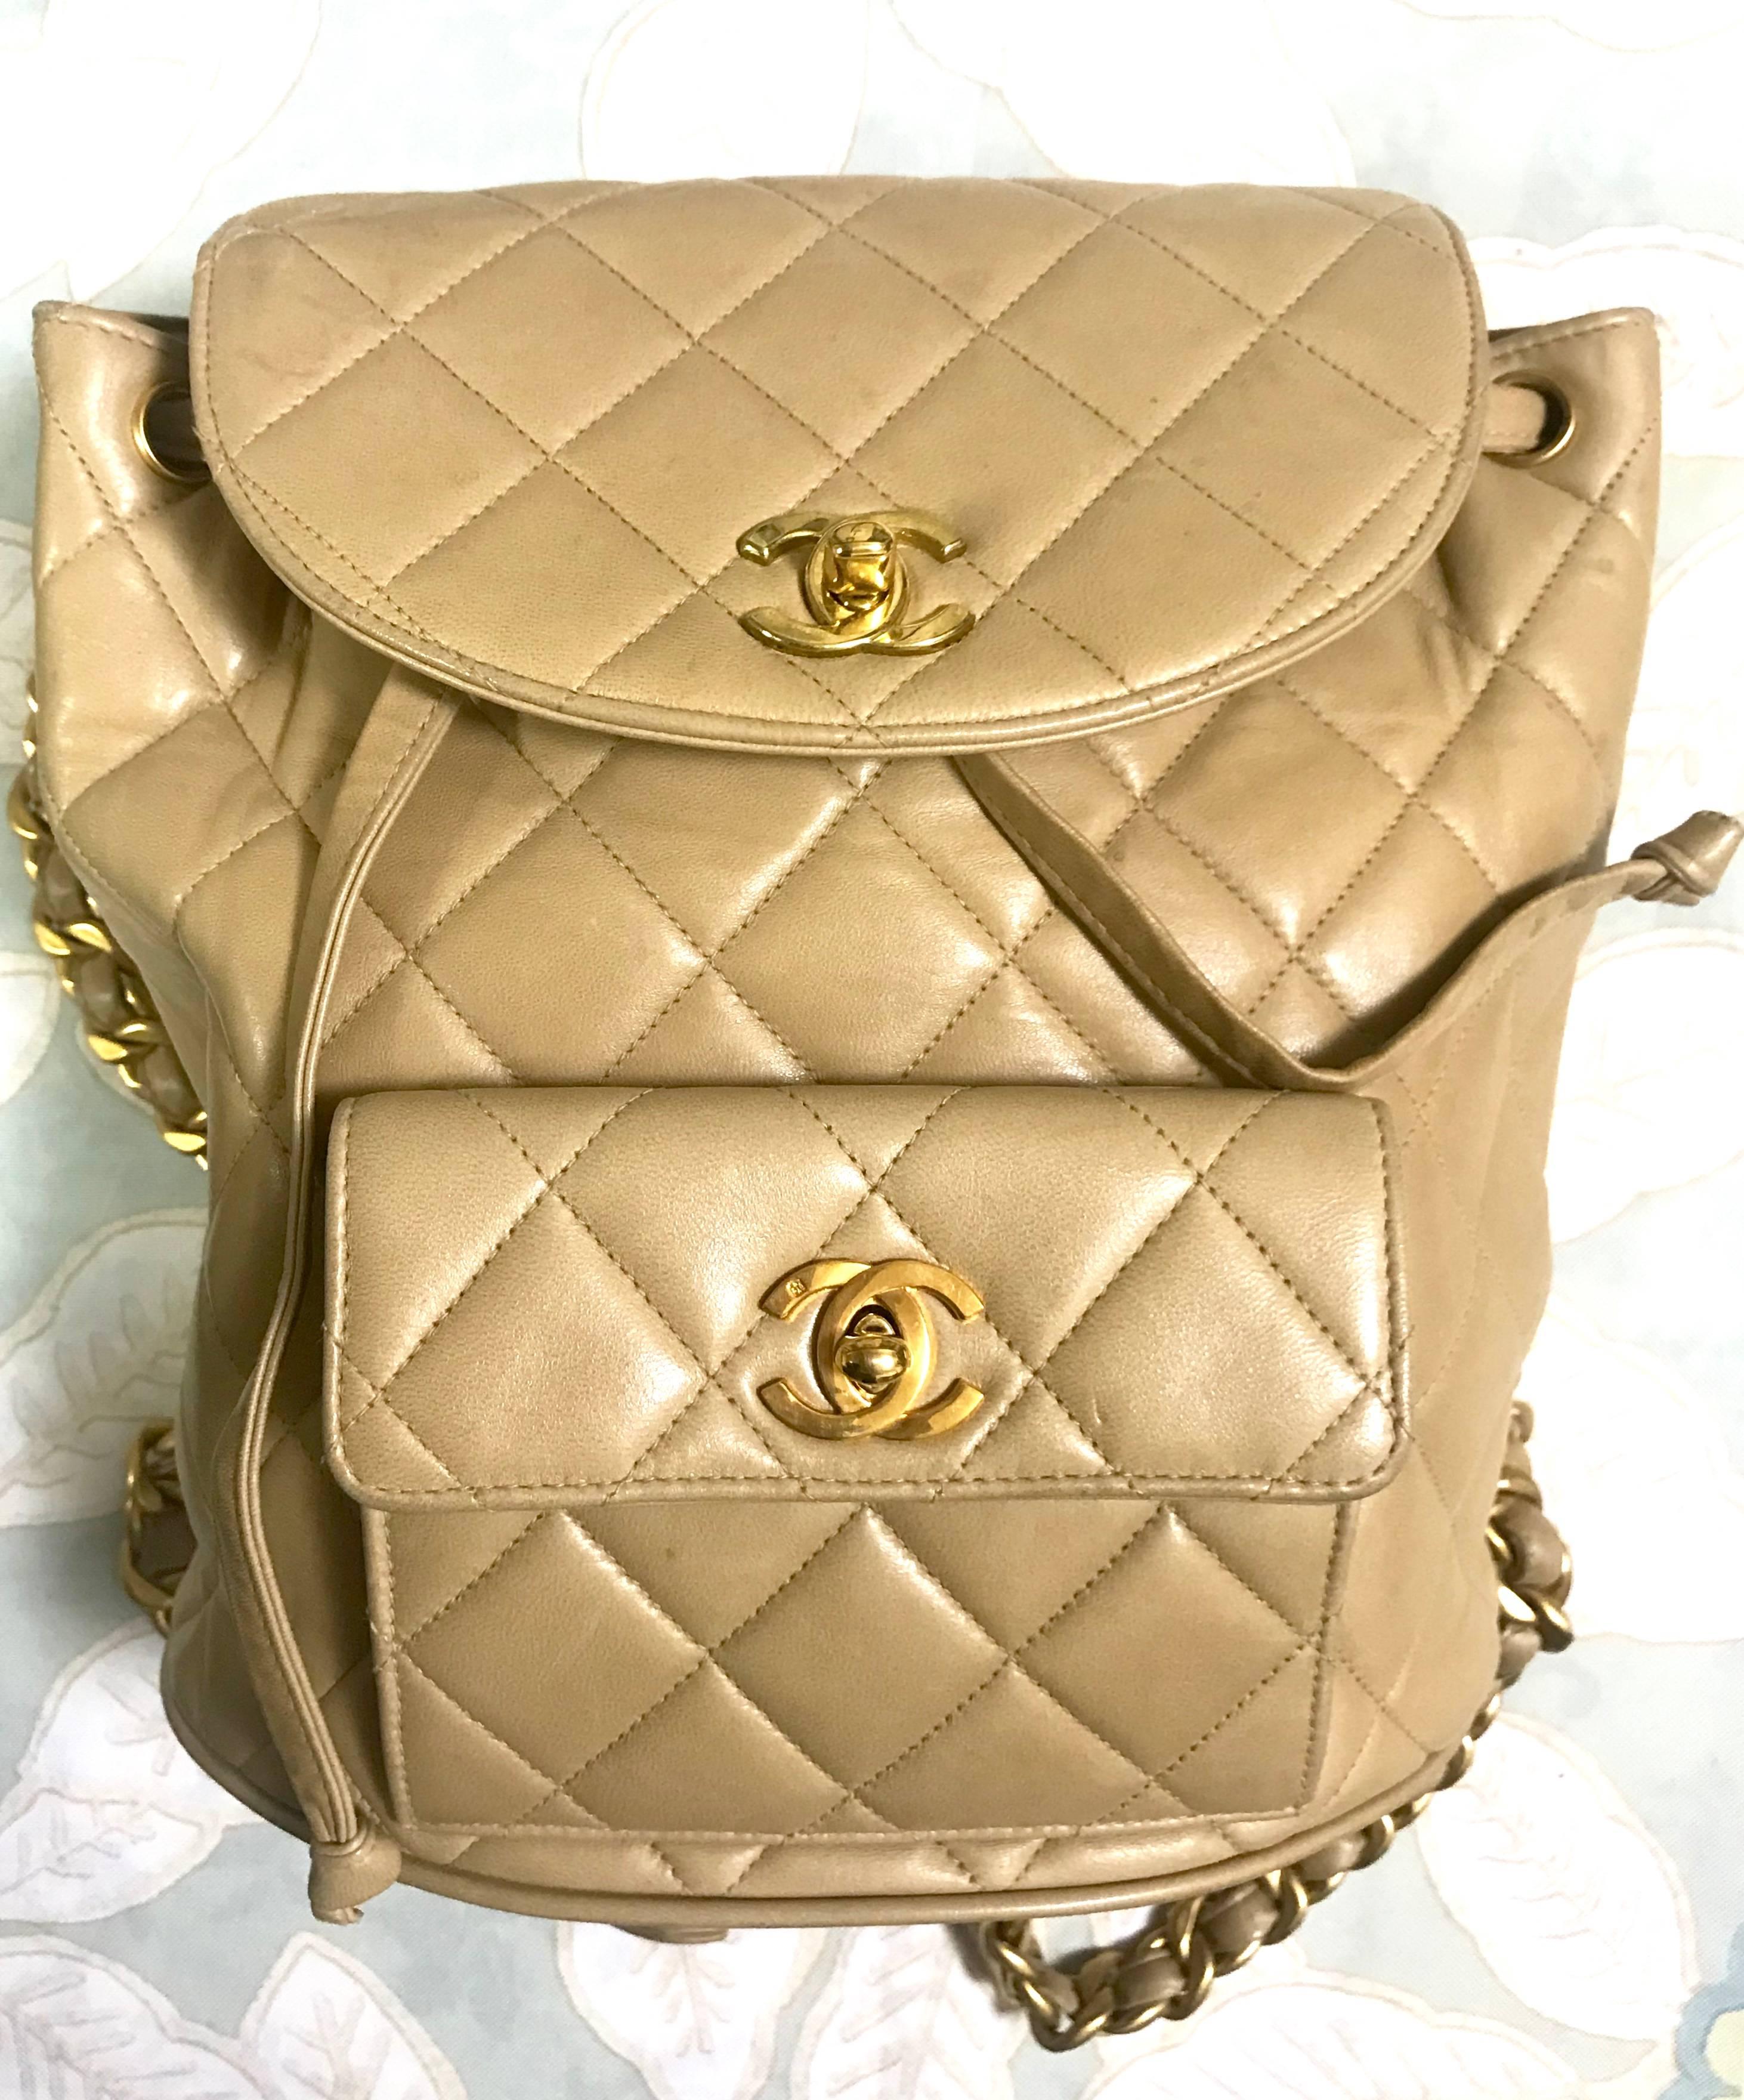 1990s. Vintage CHANEL classic beige lamb leather 2.55 backpack with gold chain strap and CC closure. Classic and popular bag.

Introducing classic 2.55 backpack in beige lambskin from CHANEL back in the 90's.  Don't miss it!

Featuring gold tone